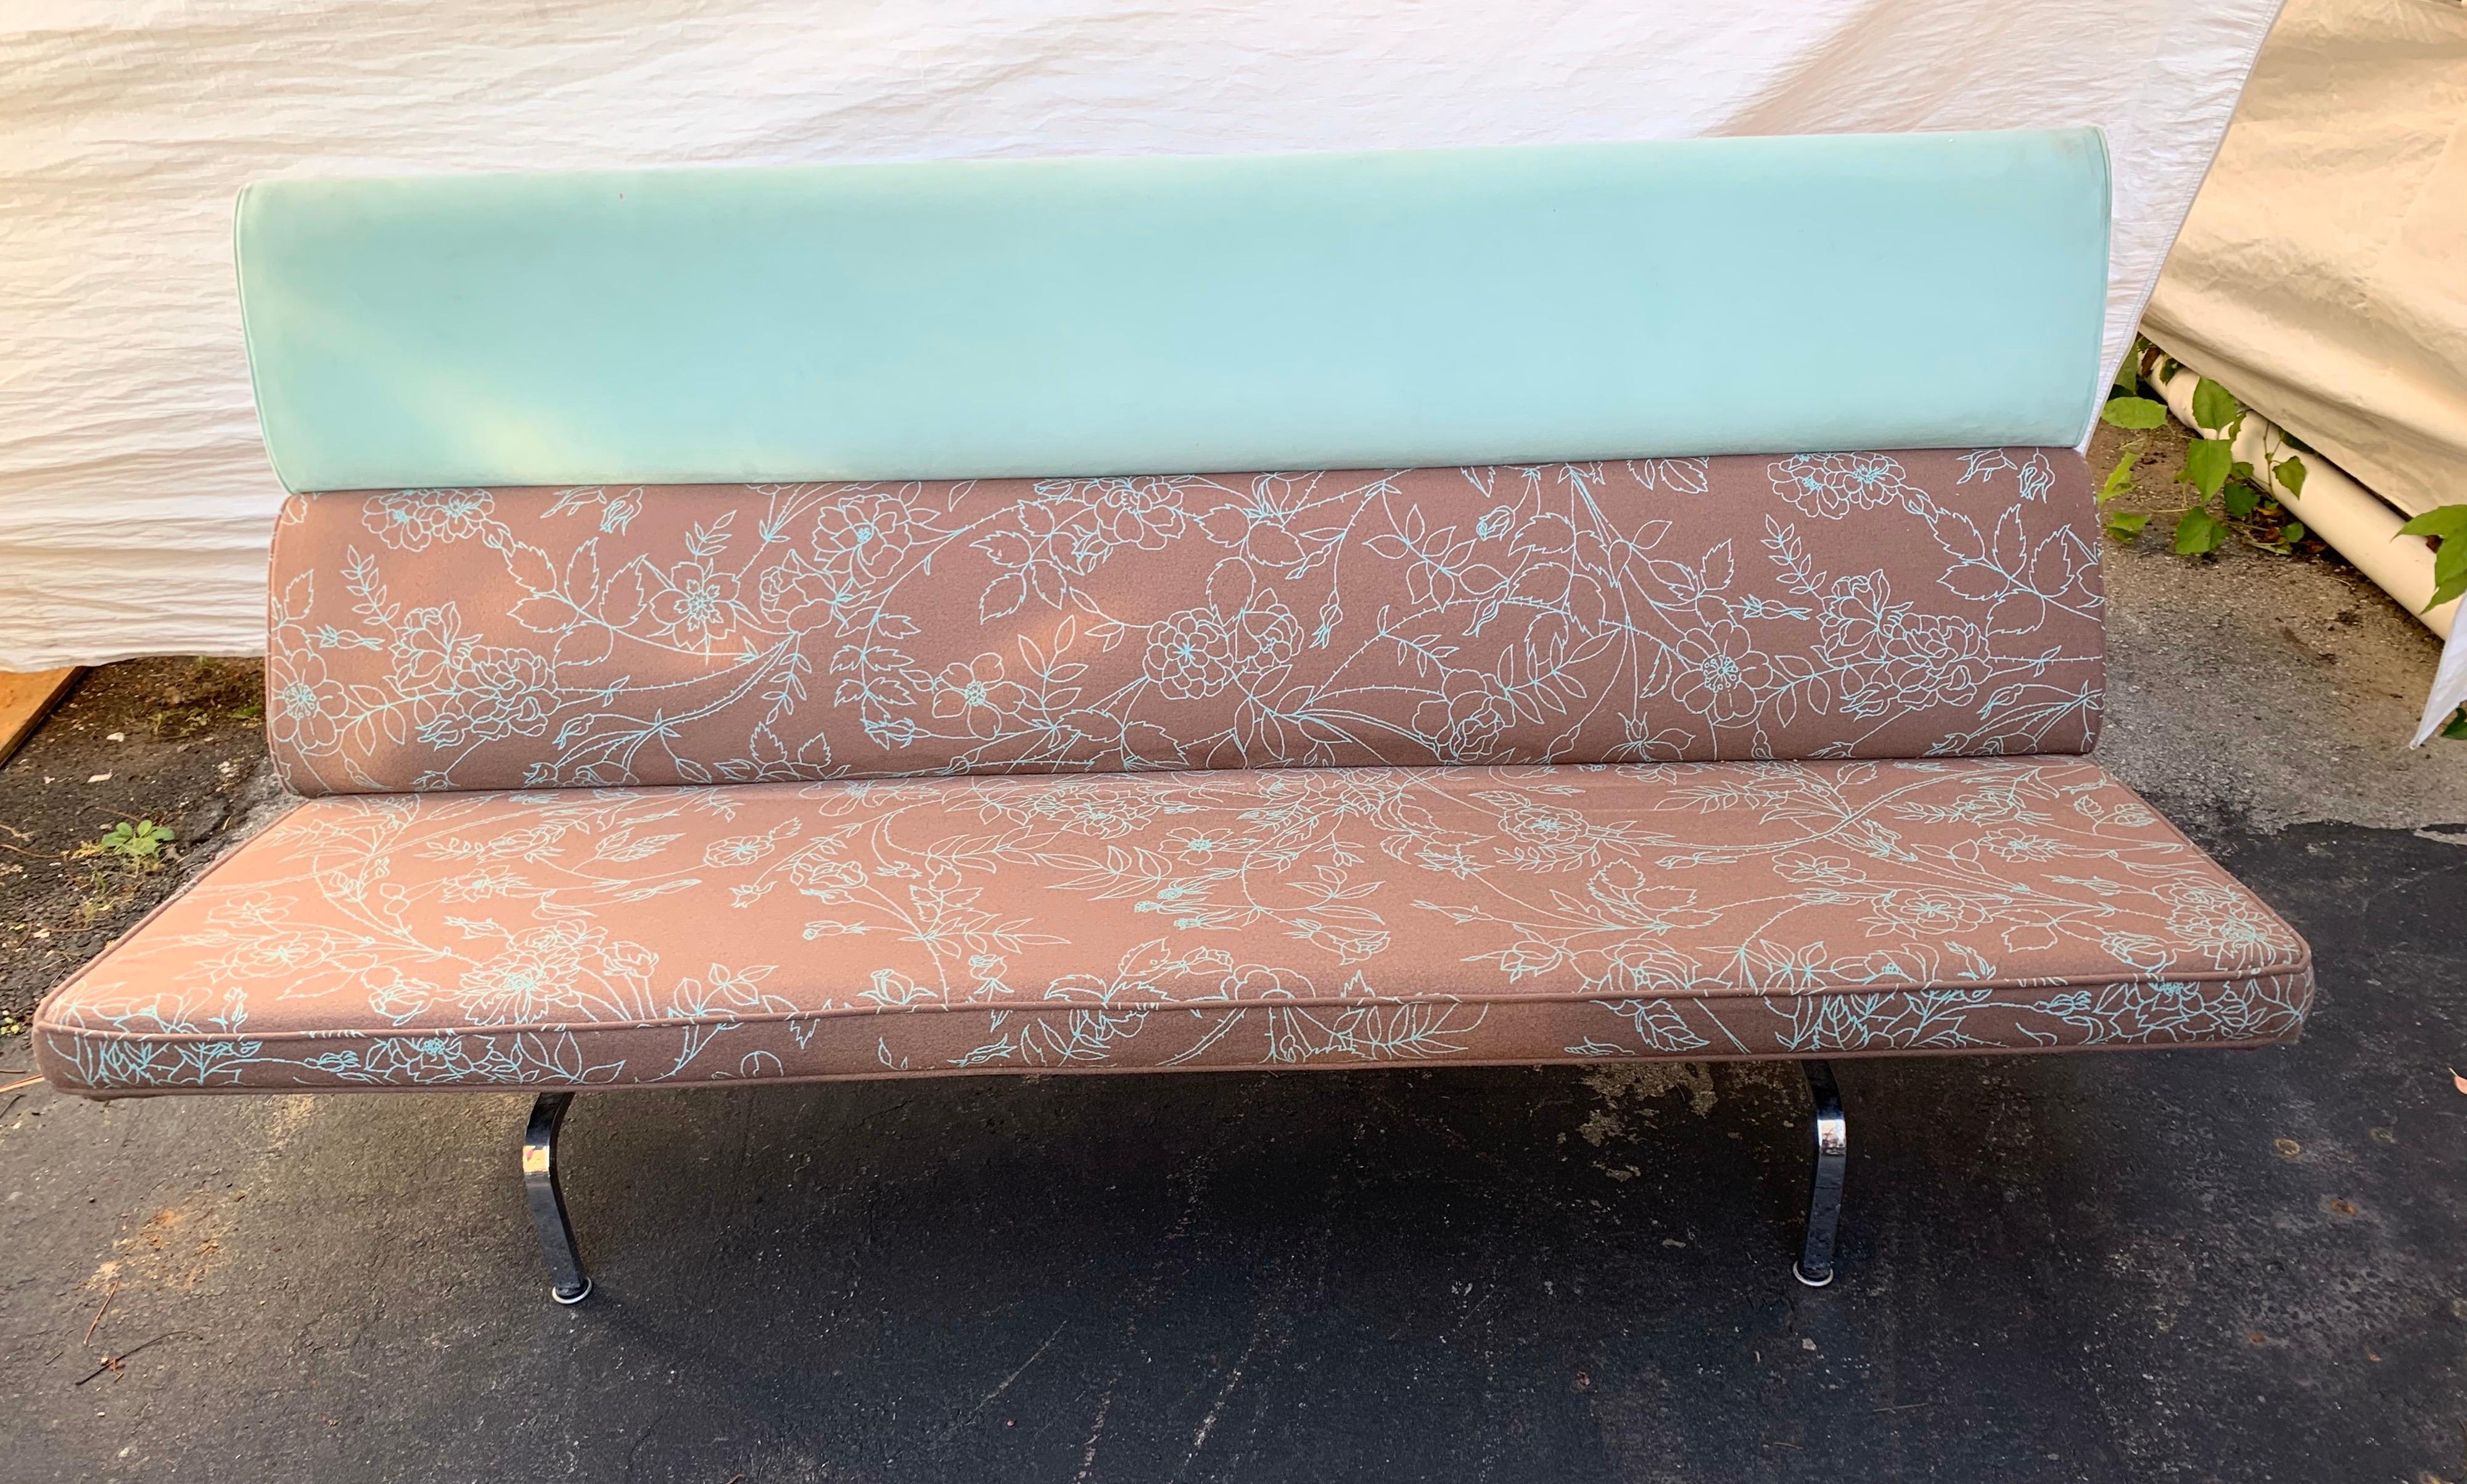 The signed, iconic, clean-lined sofa design by Charles and Ray Eames upholstered in a wonderful whimsical fabric. This piece comes from the Avon Corporation headquarters in Rye, NY.